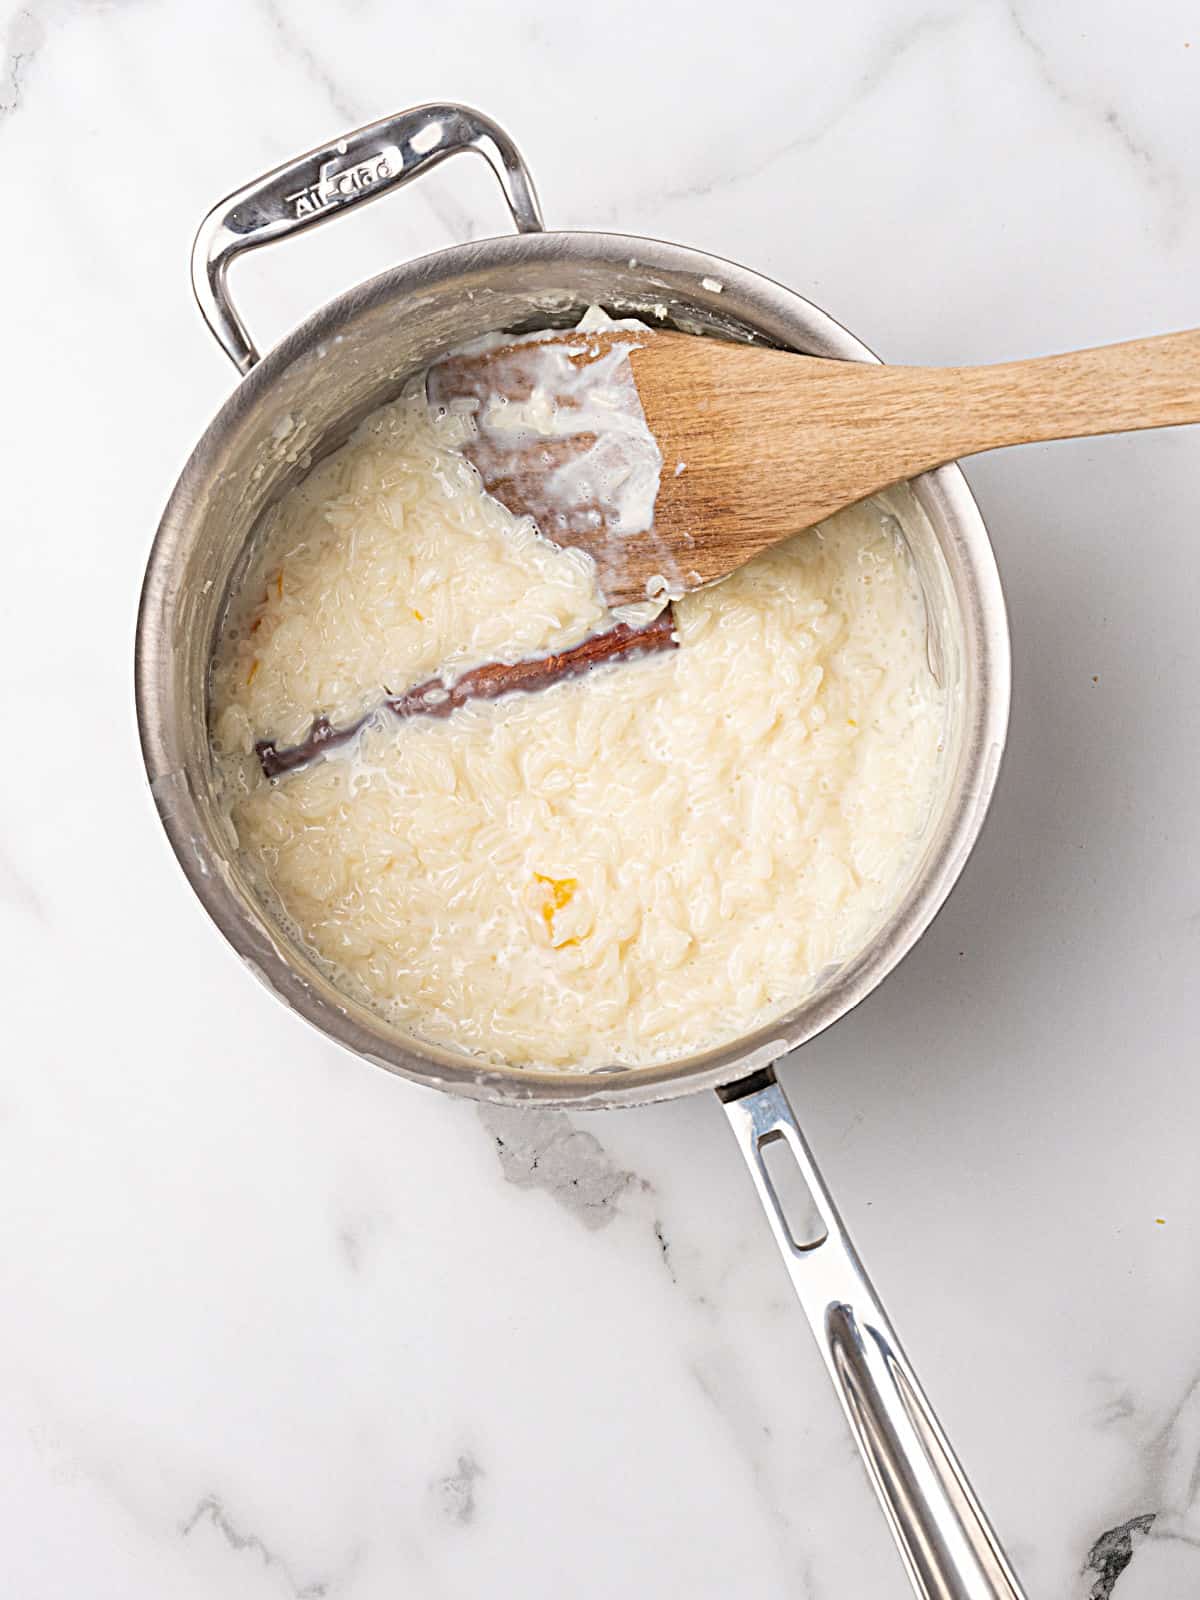 Wooden spoon inside a metal saucepan with cinnamon rice pudding. White marble surface.